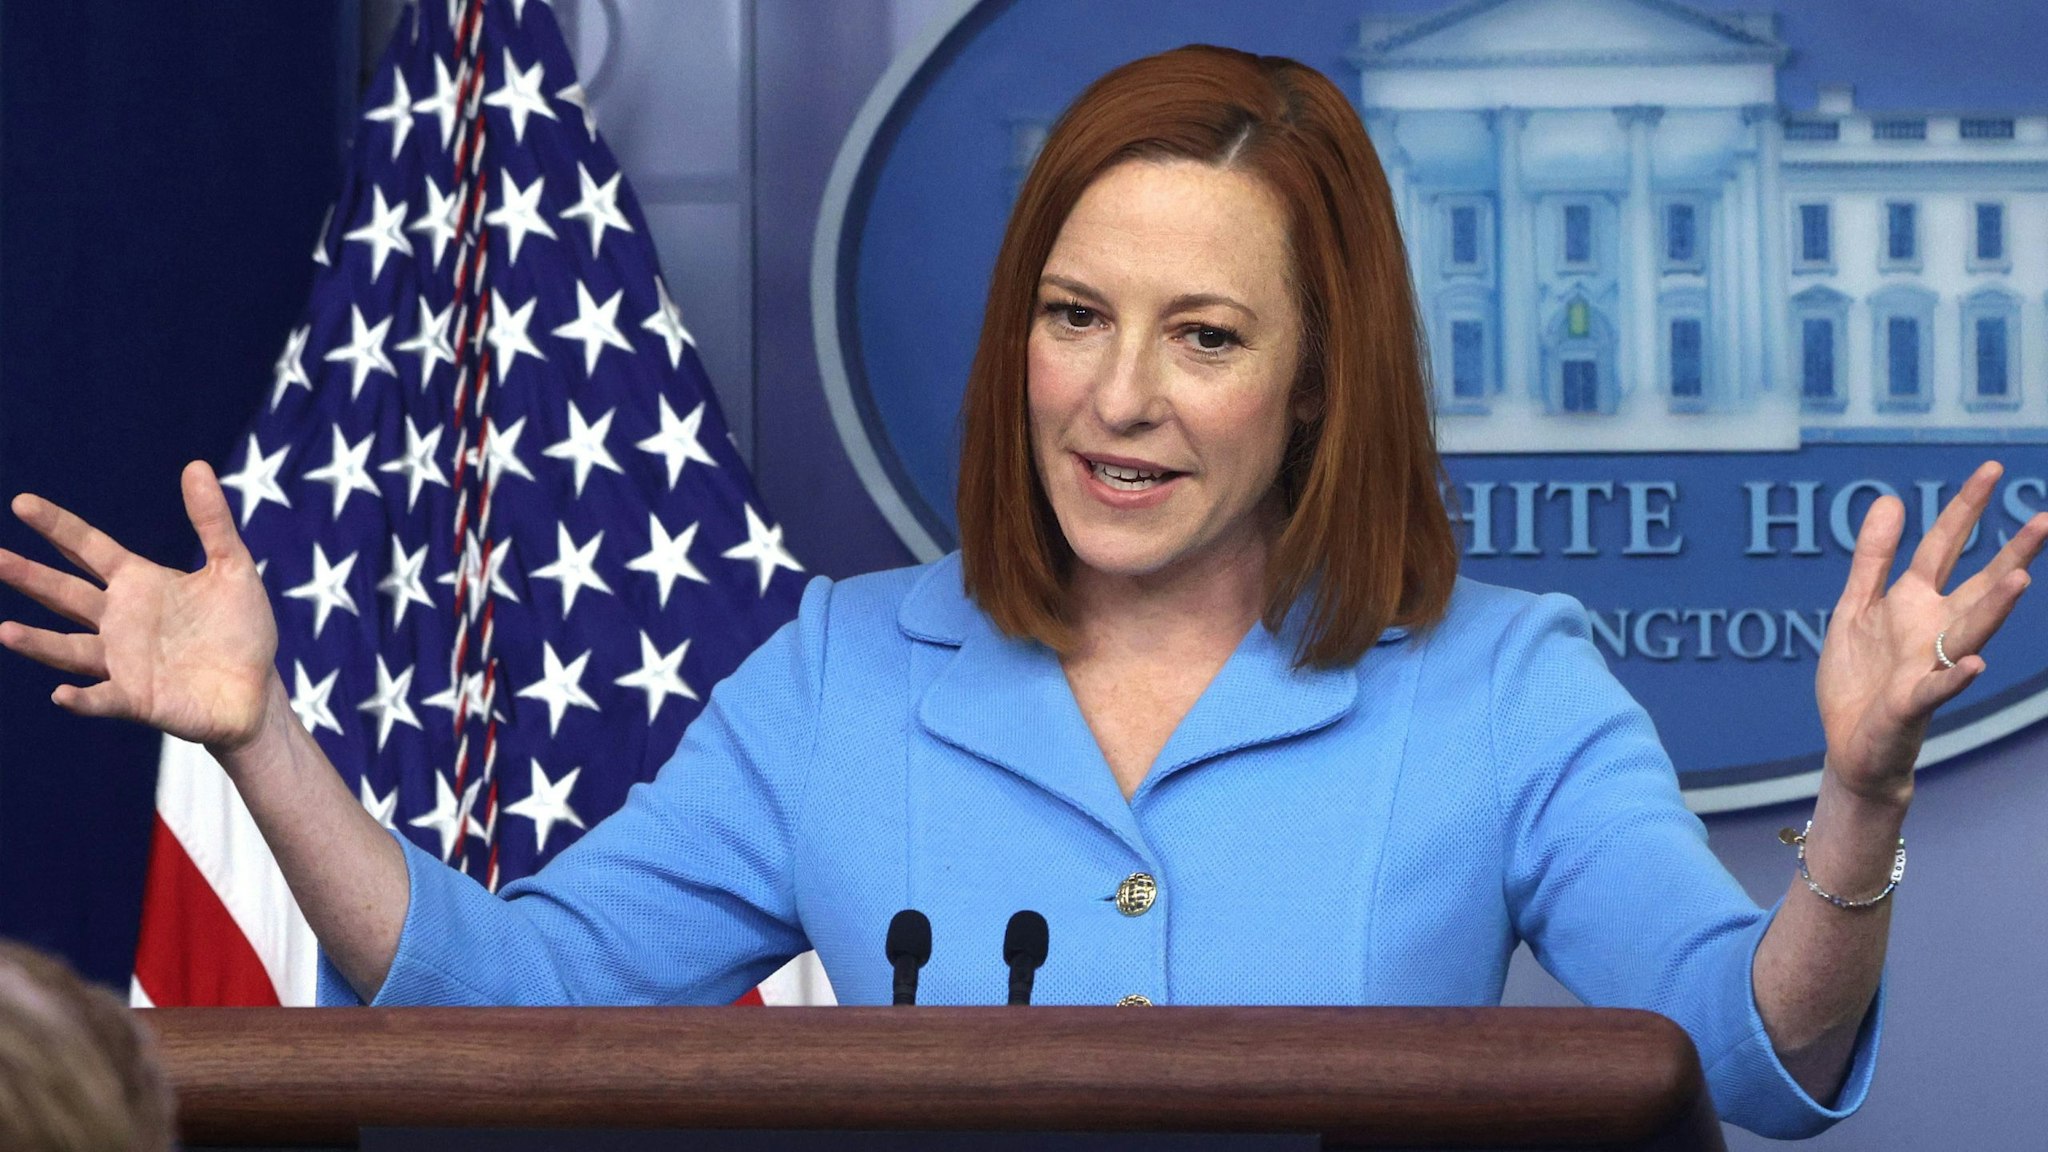 WASHINGTON, DC - JUNE 02: White House Press Secretary Jen Psaki speaks during a daily press briefing at the James Brady Press Briefing Room of the White House on June 2, 2021 in Washington, DC. Psaki held a daily news briefing to answer questions from members of the press.